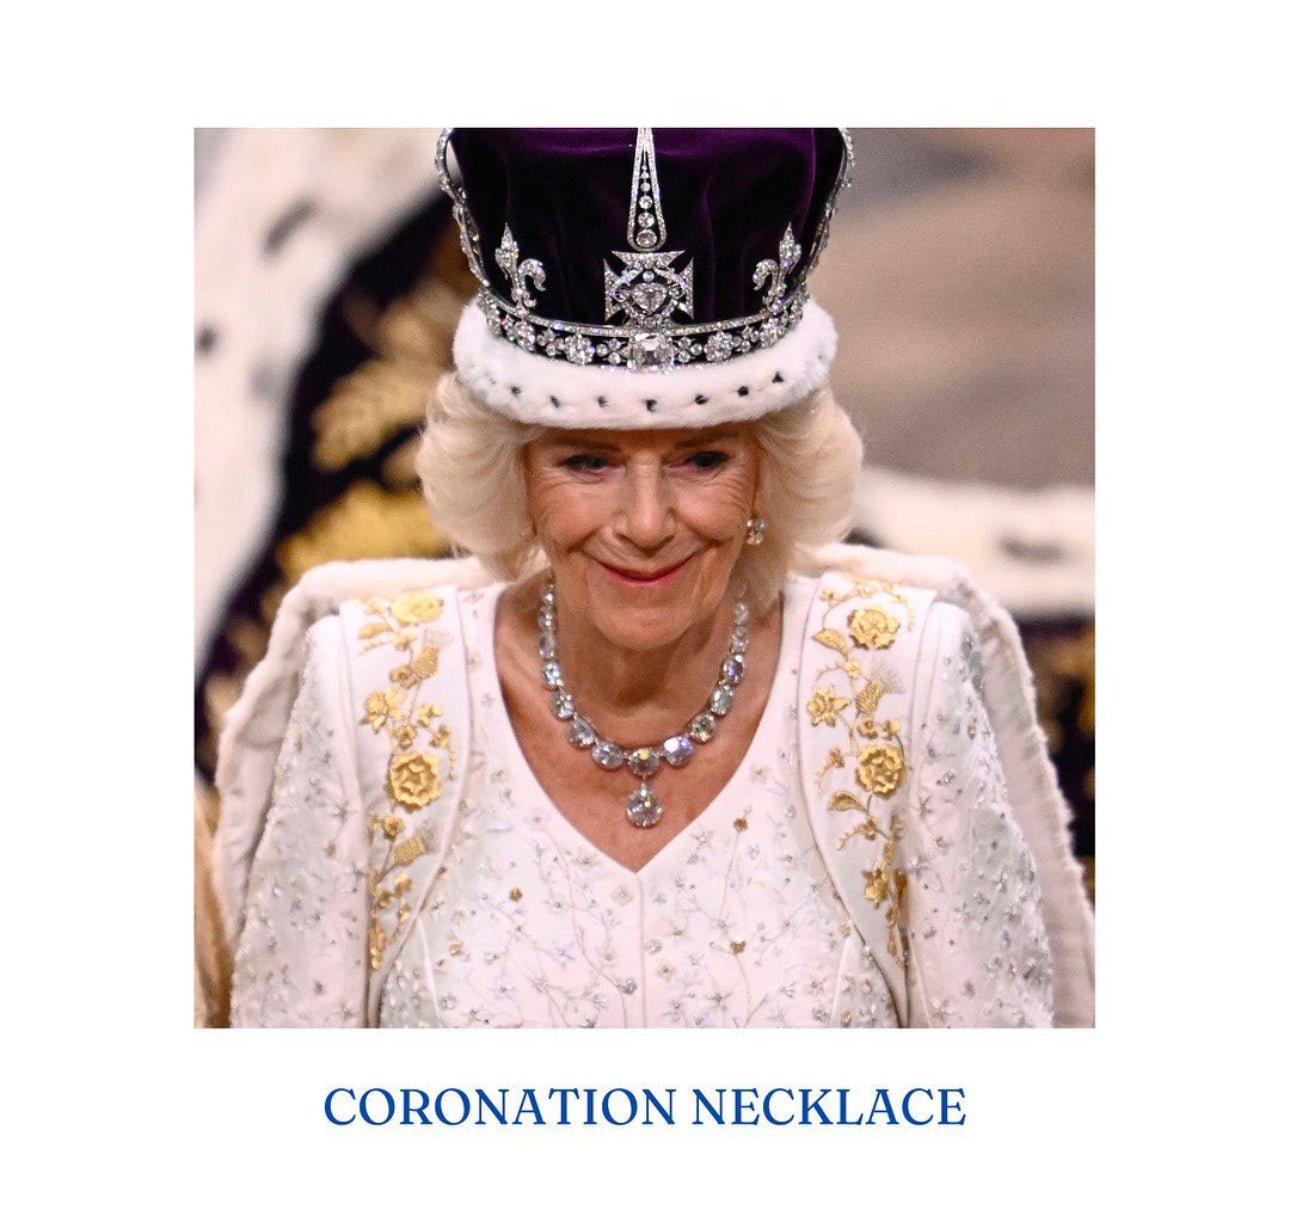 Coronation Necklace – The Iconic Jewelry Camilla Wore For Charles’s Crowning - DSF Antique Jewelry